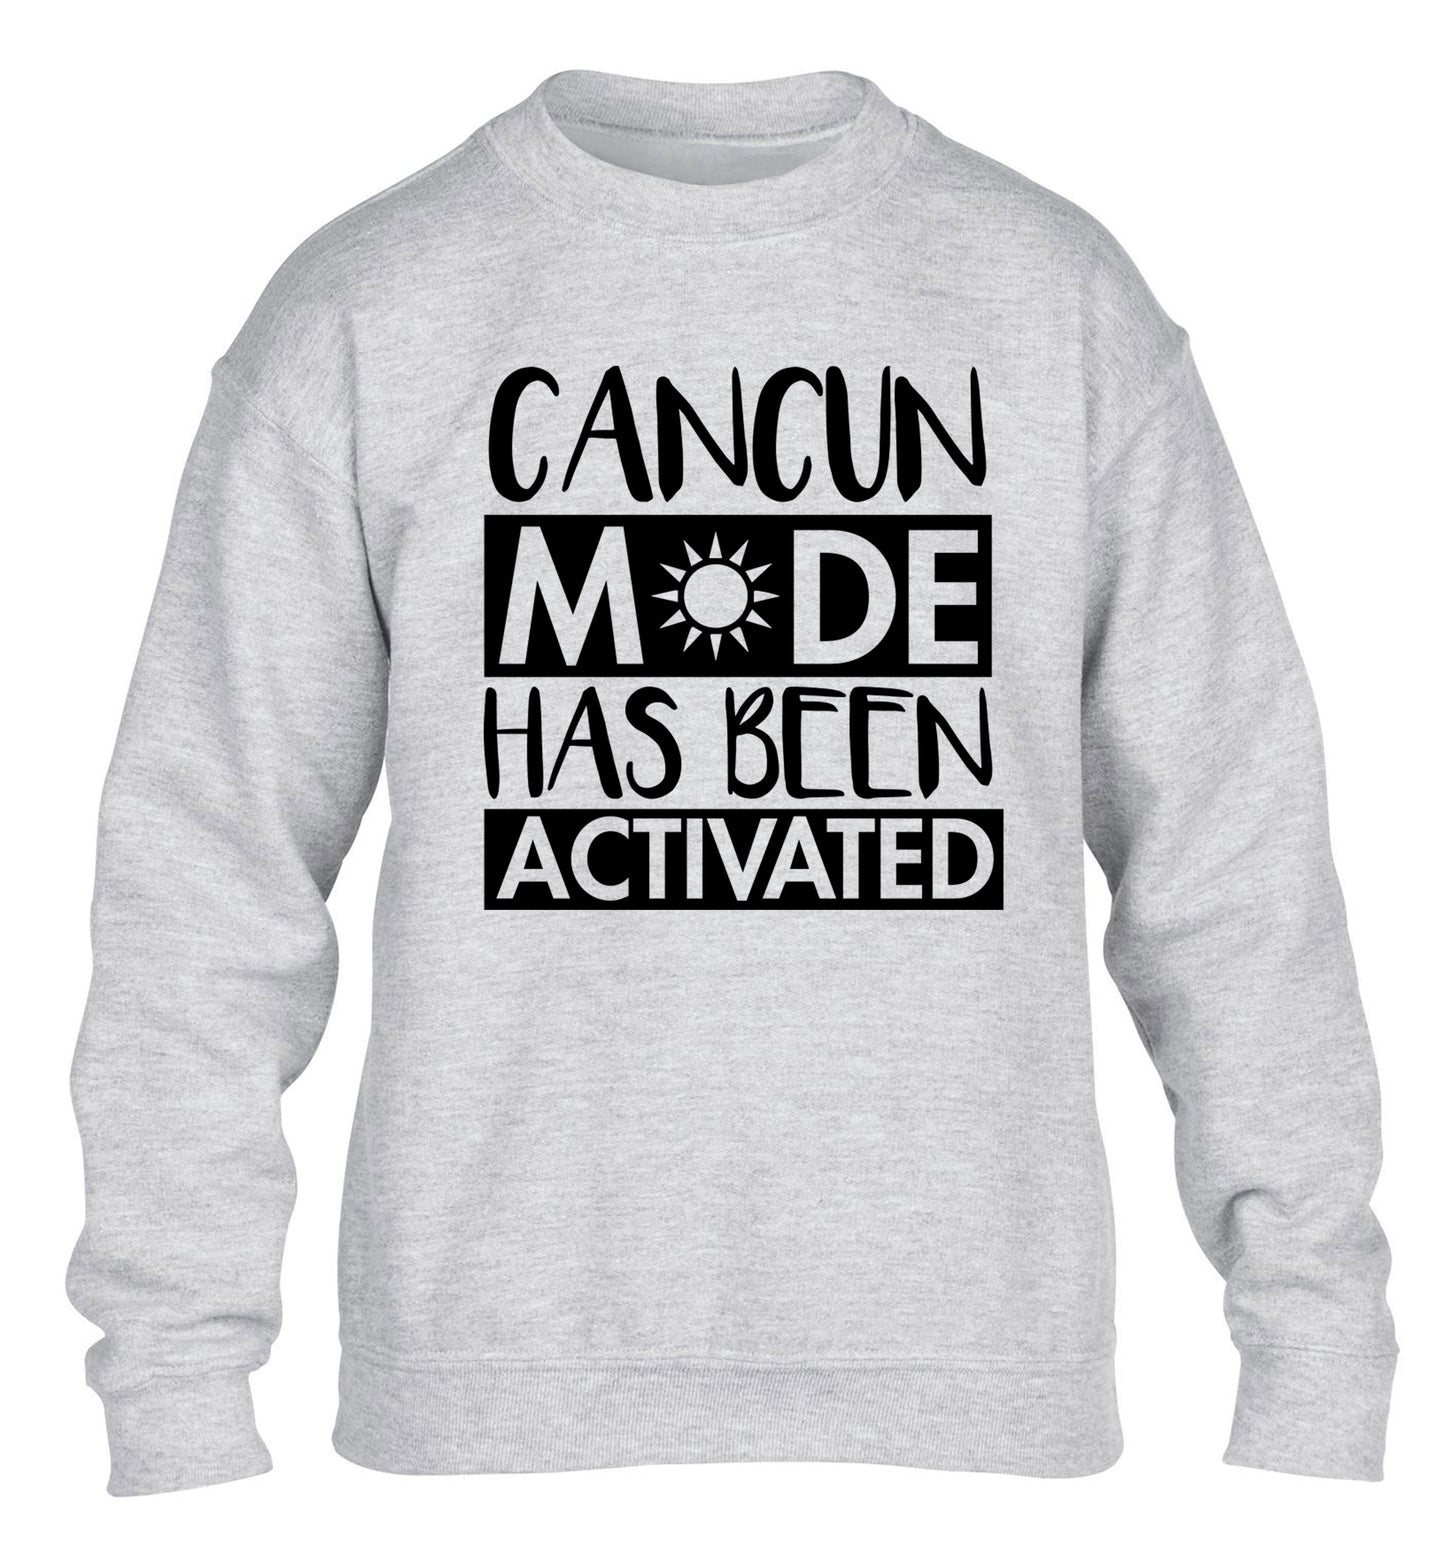 Cancun mode has been activated children's grey sweater 12-14 Years